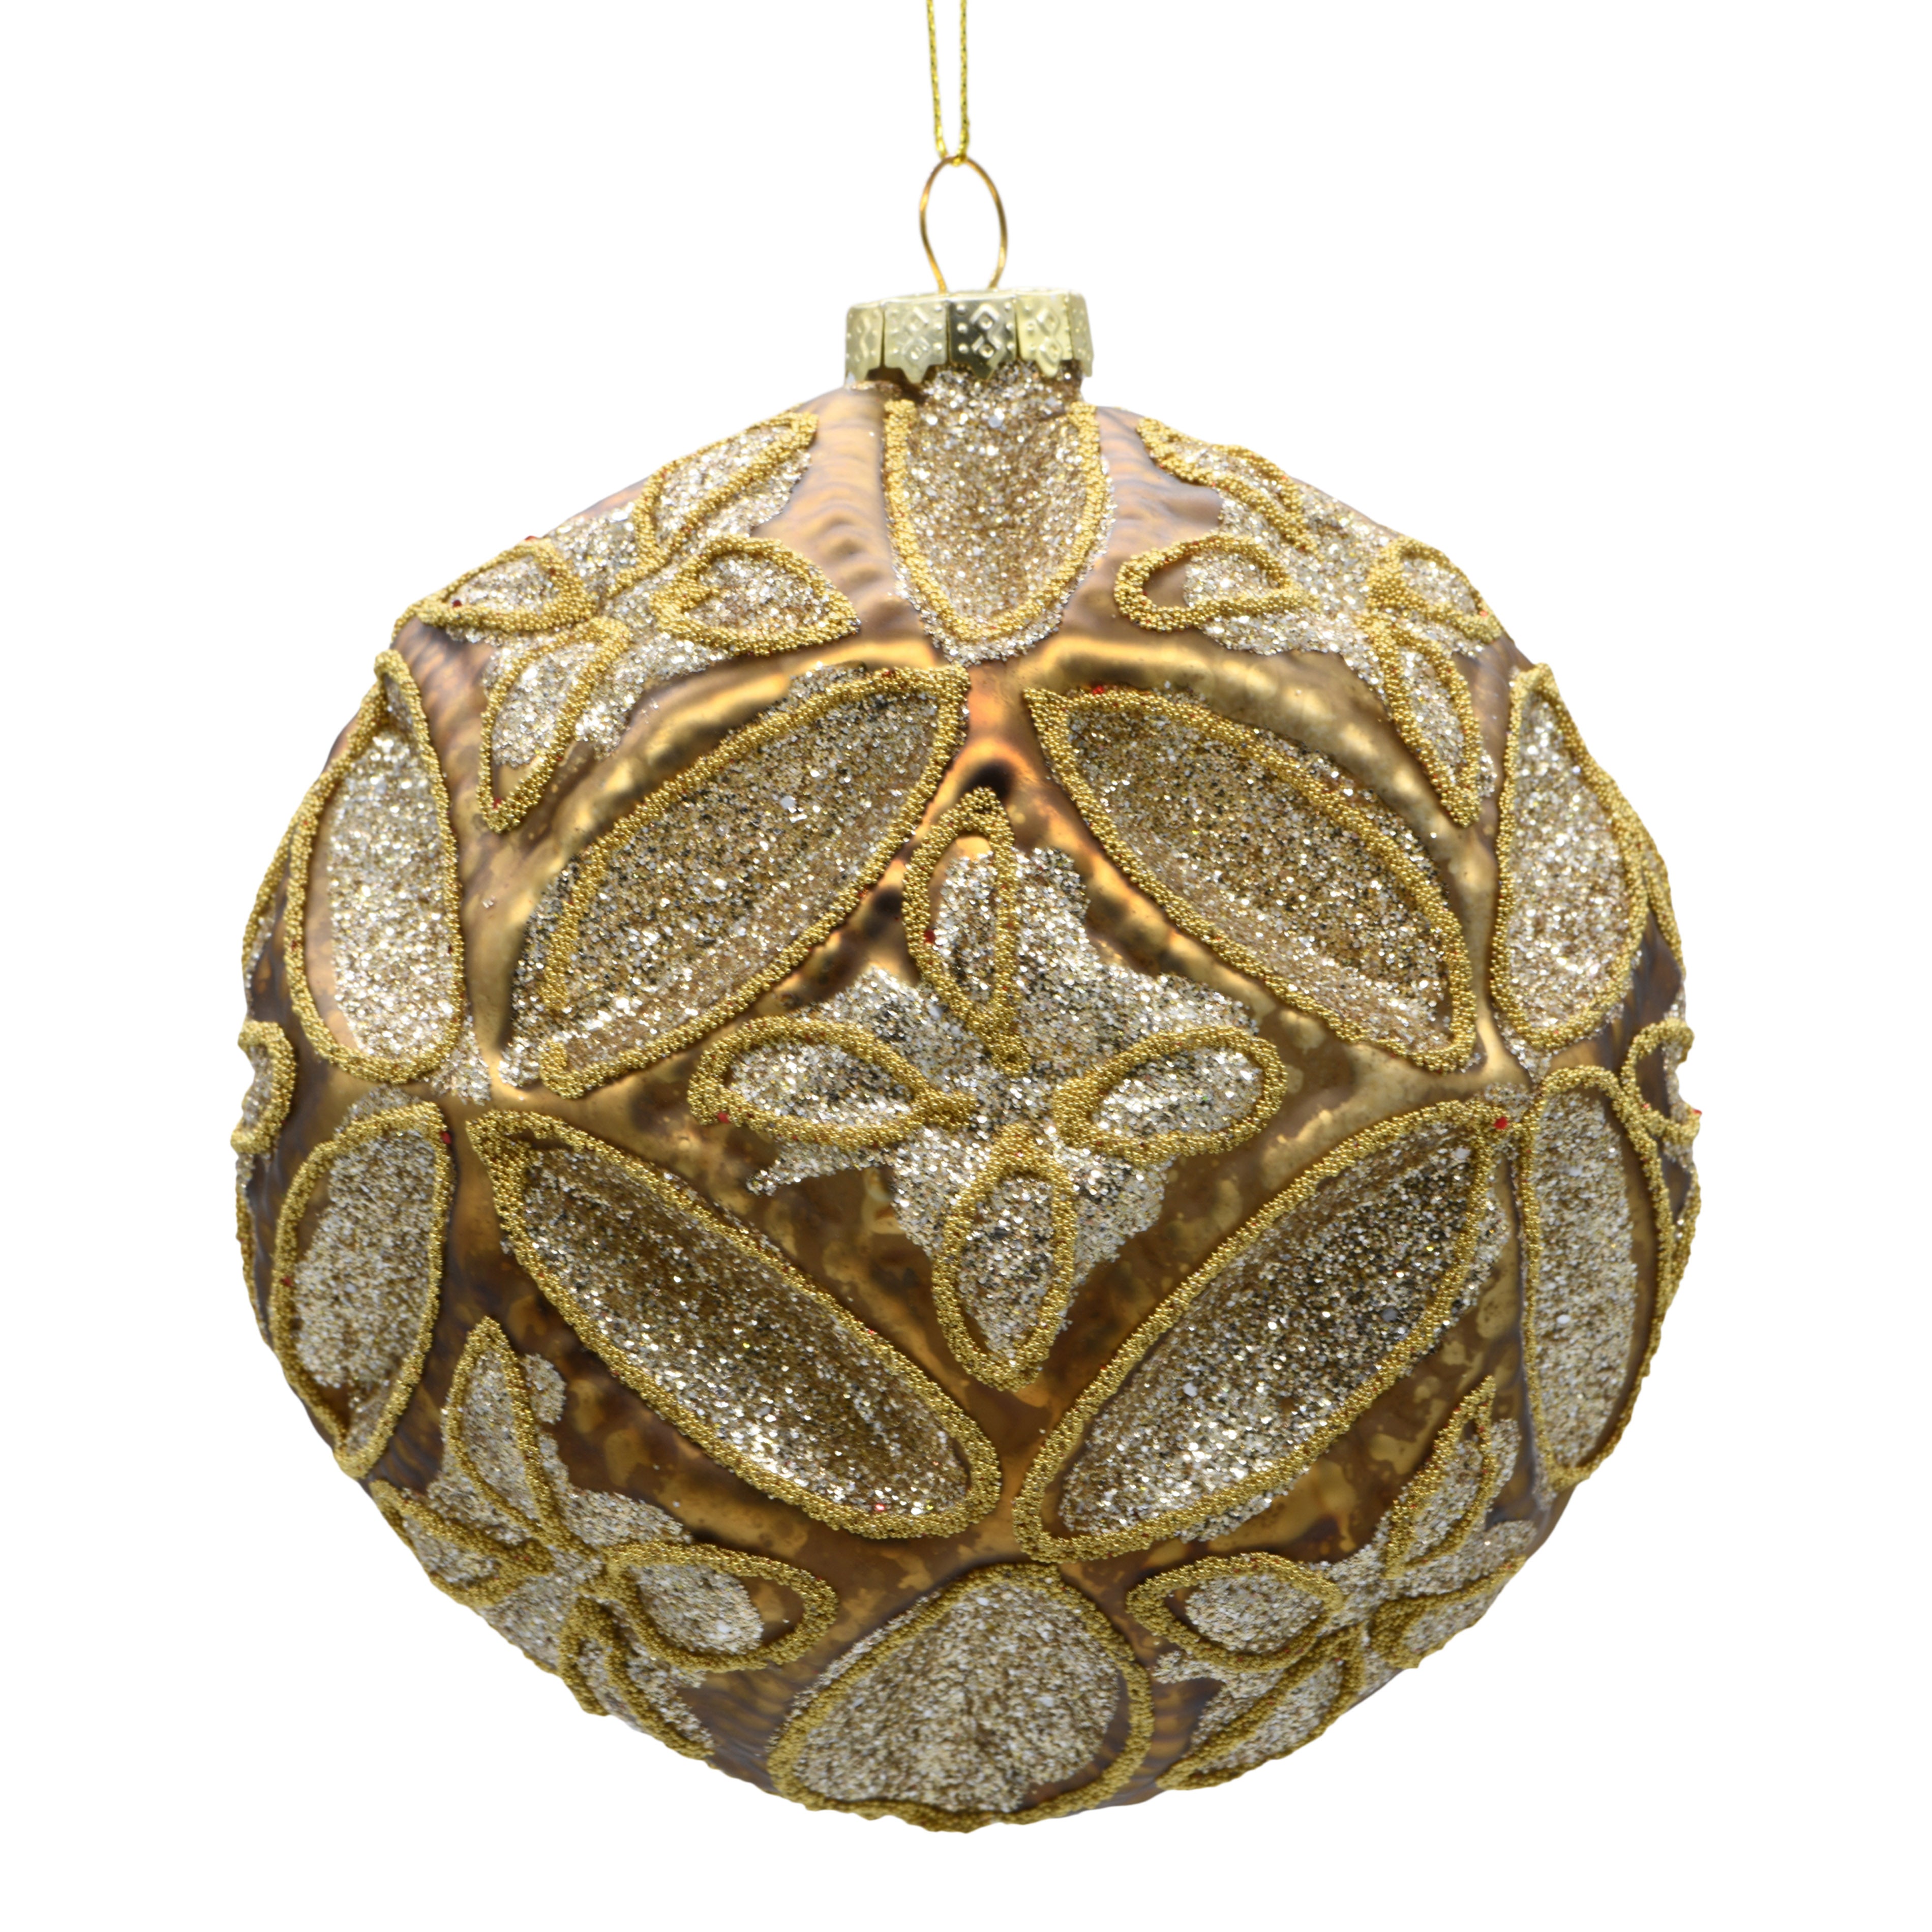 Gold sparkly large Christmas bauble on a white background